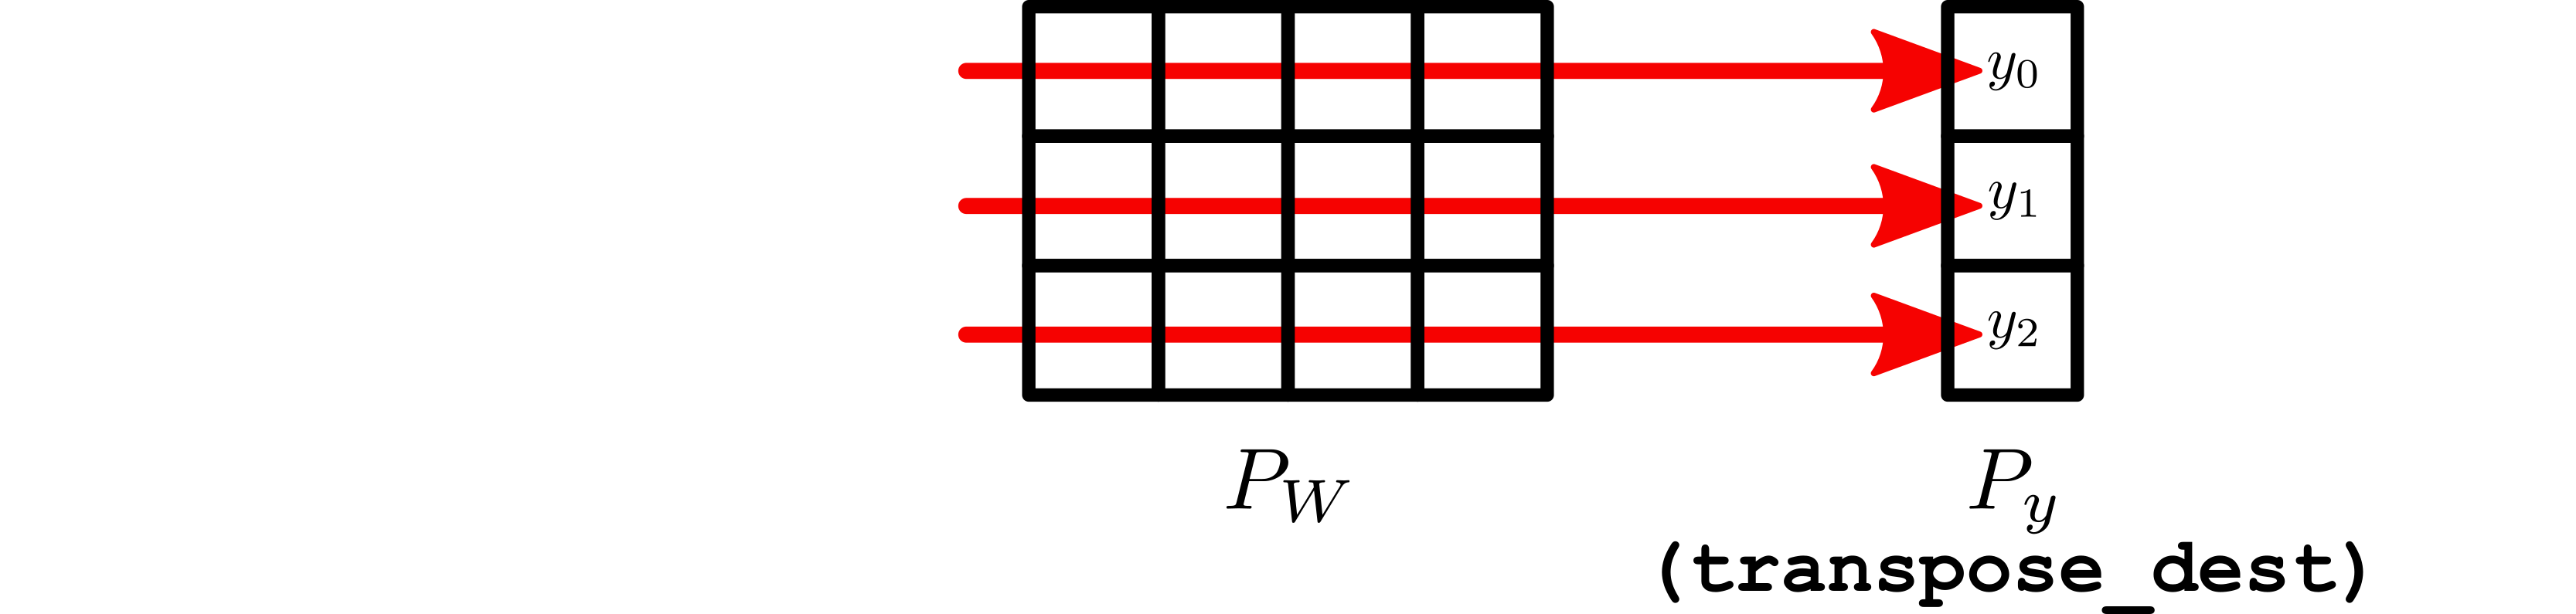 Example forward sum-reduction in the distributed linear layer.